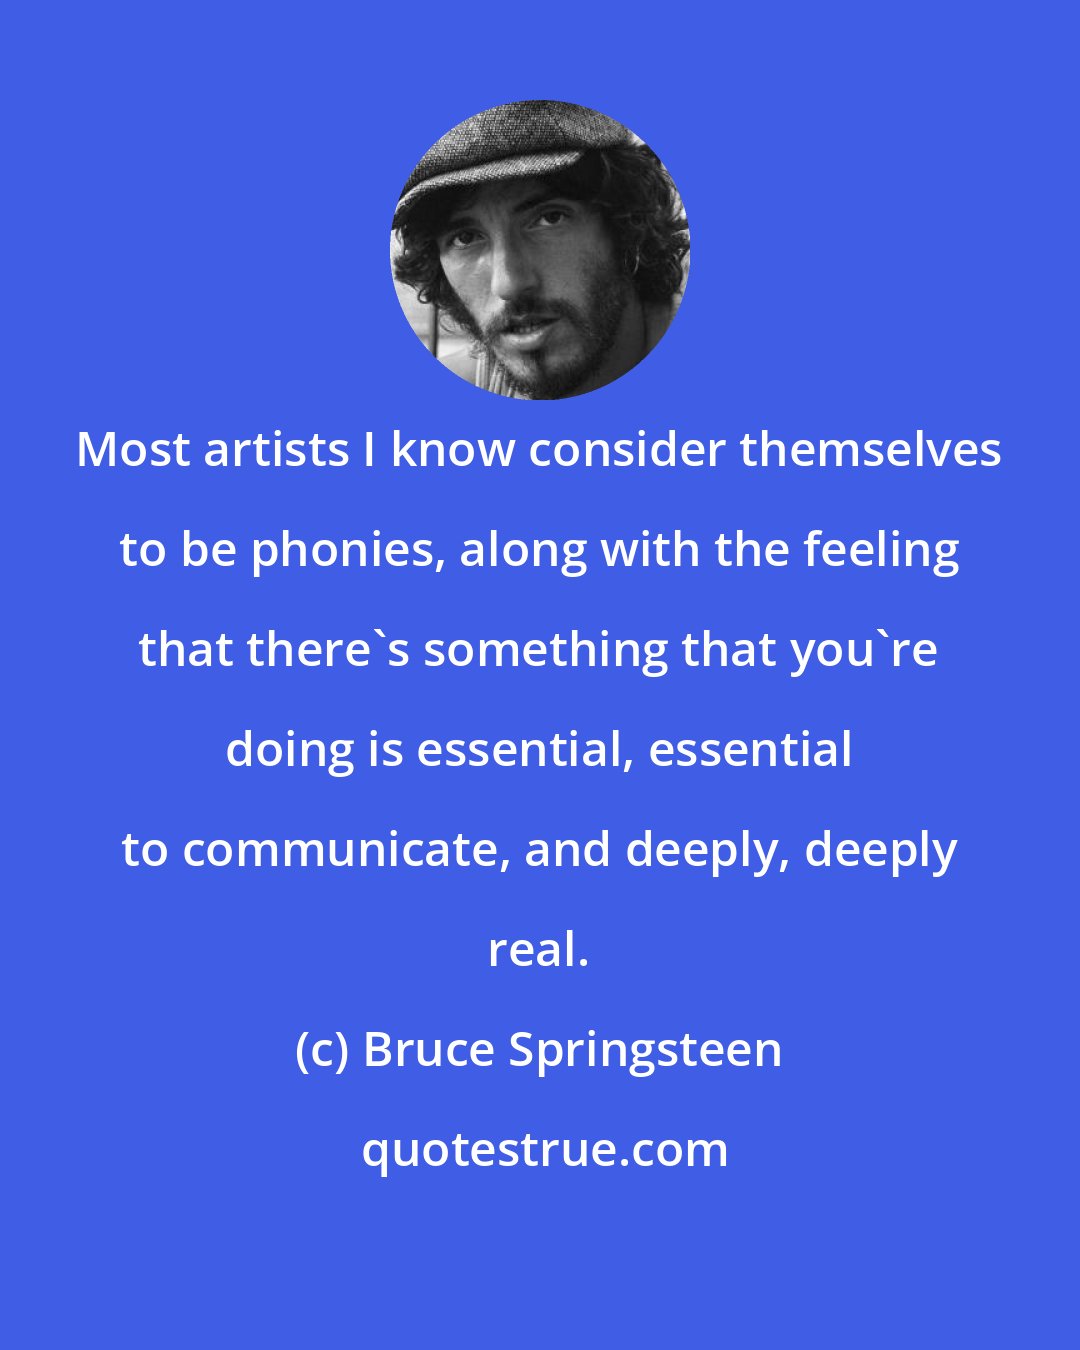 Bruce Springsteen: Most artists I know consider themselves to be phonies, along with the feeling that there's something that you're doing is essential, essential to communicate, and deeply, deeply real.